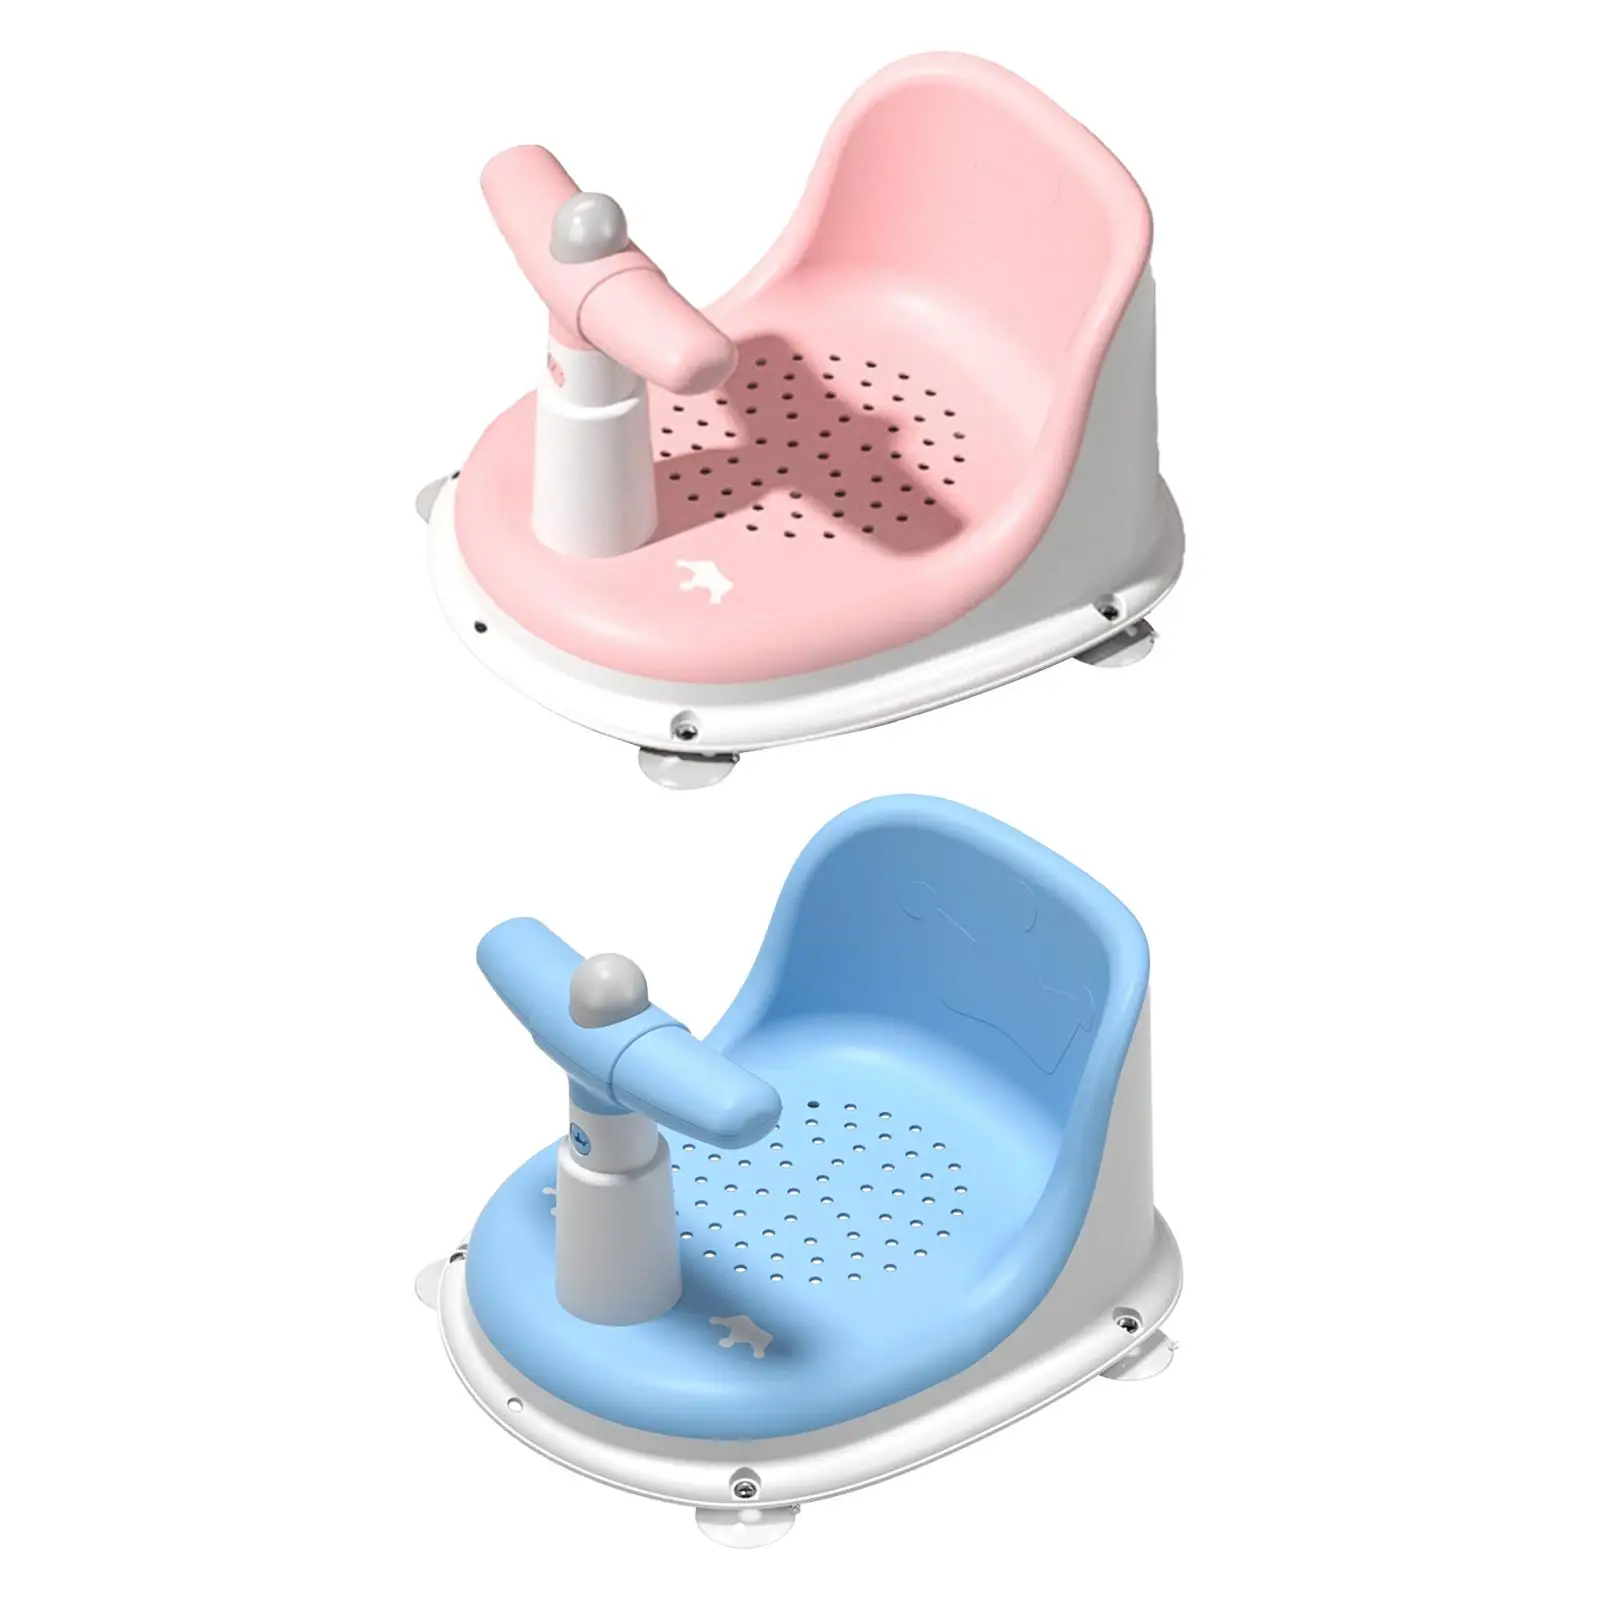 Baby Bathtub Seat with Secure Suction Cups Stable Foldable Hanging Comfortable Baby Bath Seat for Living Room Home Bathroom